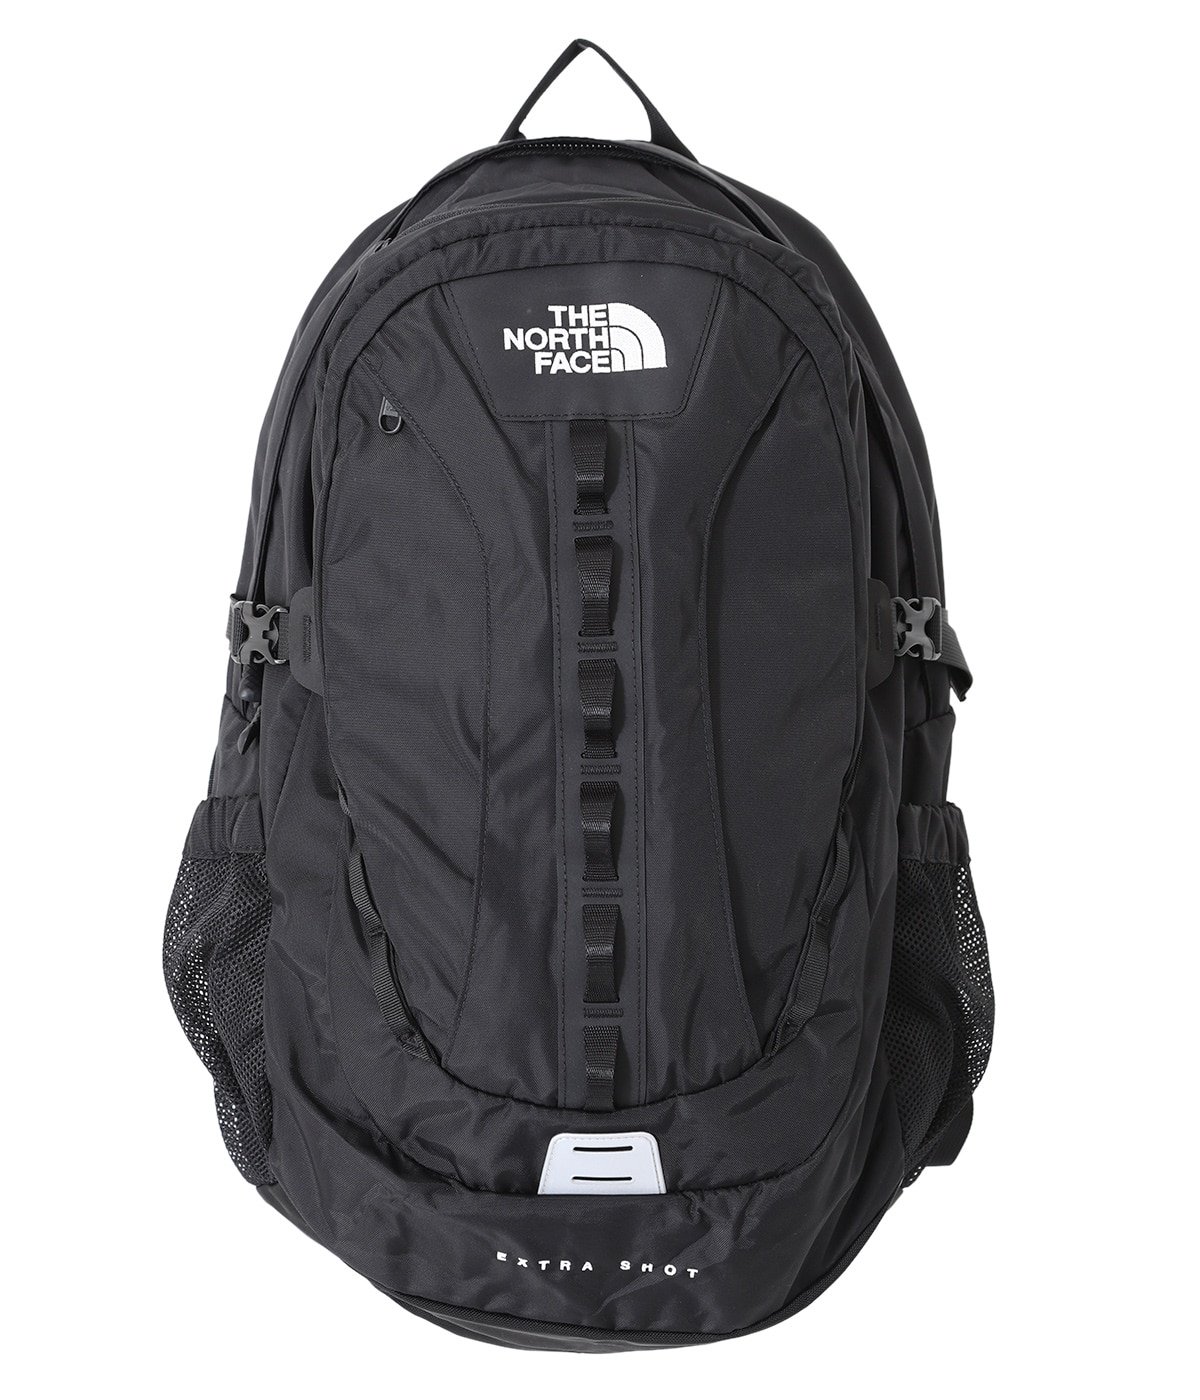 Extra Shot | THE NORTH FACE(ザ ノースフェイス) / バッグ トートバッグ バックパック (メンズ)の通販 -  ARKnets(アークネッツ) 公式通販 【正規取扱店】